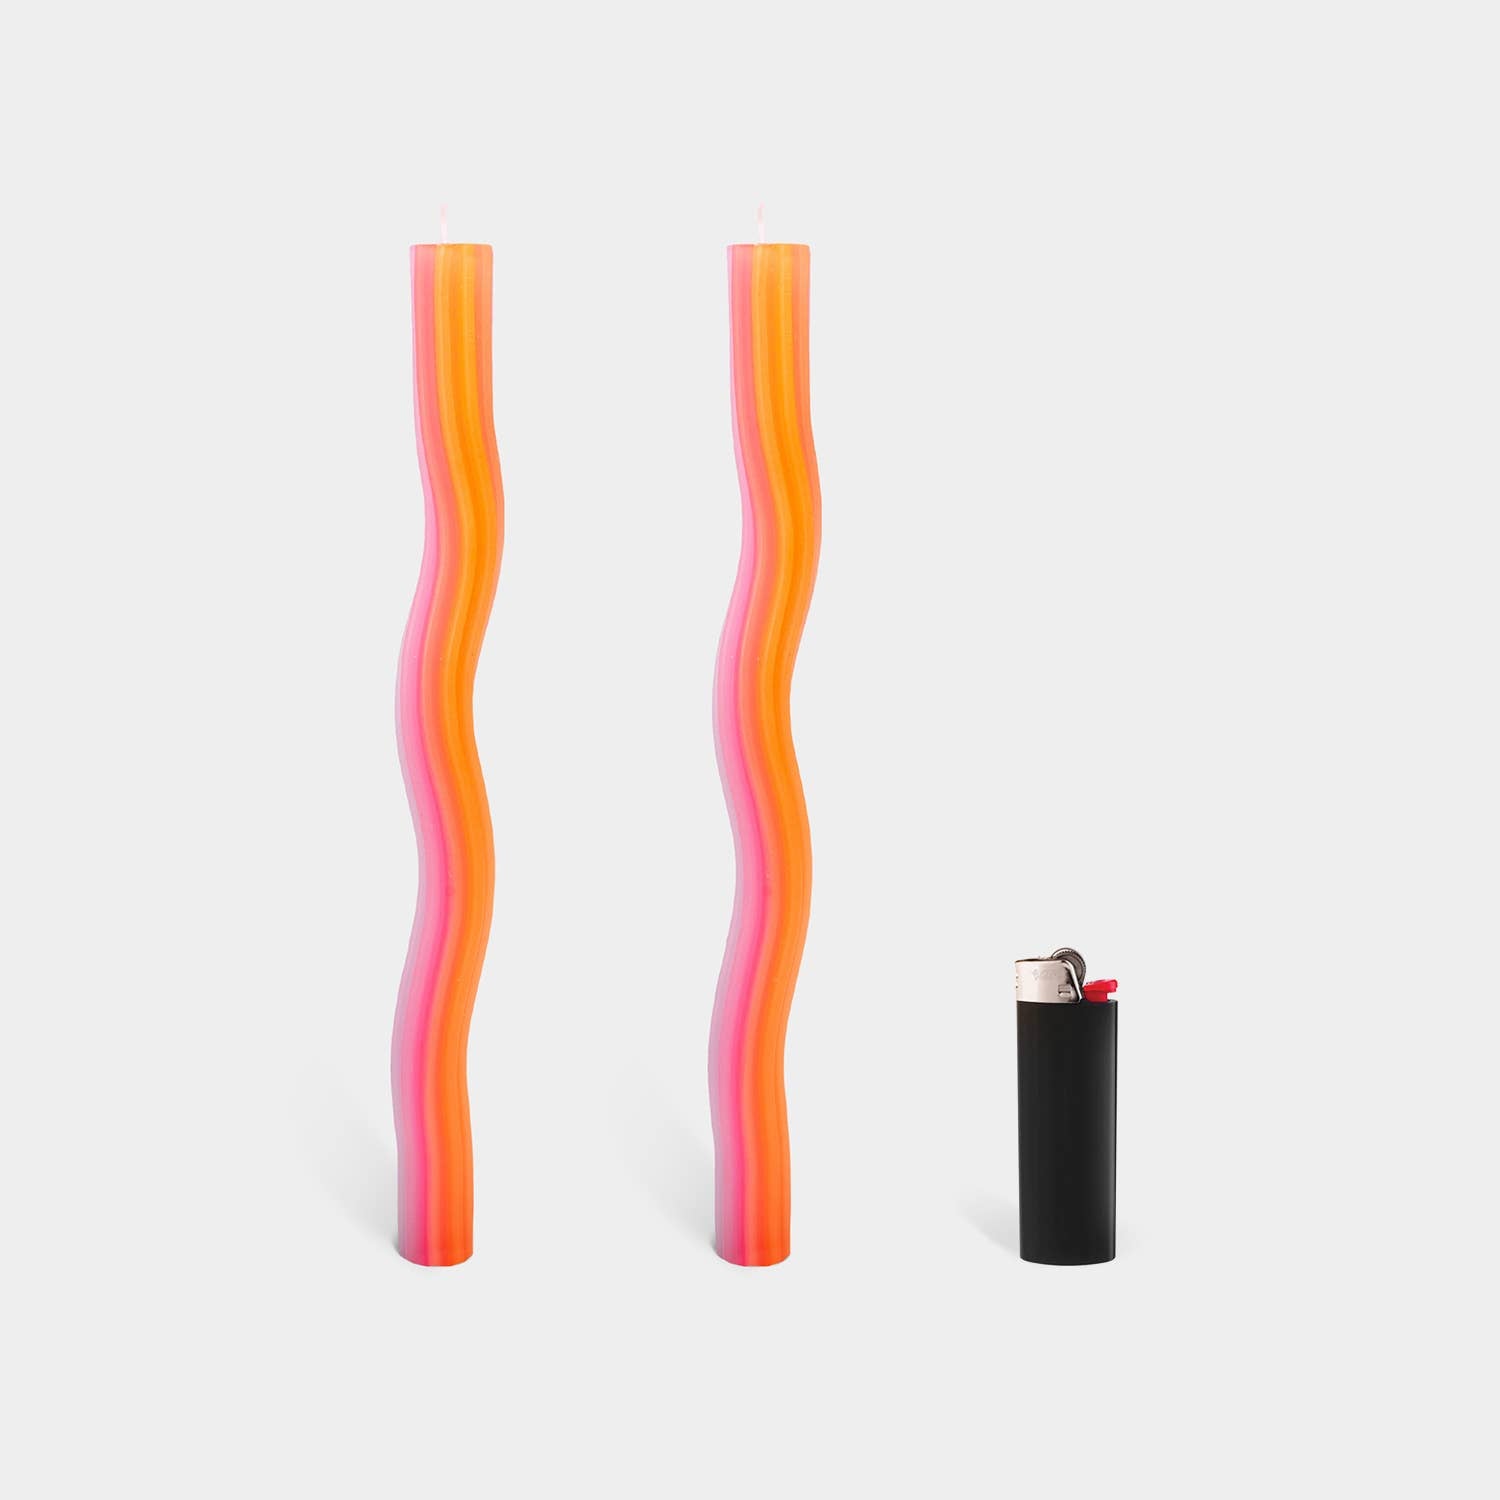 Wiggle Candles by Lex Pott - Orange (2 pack)